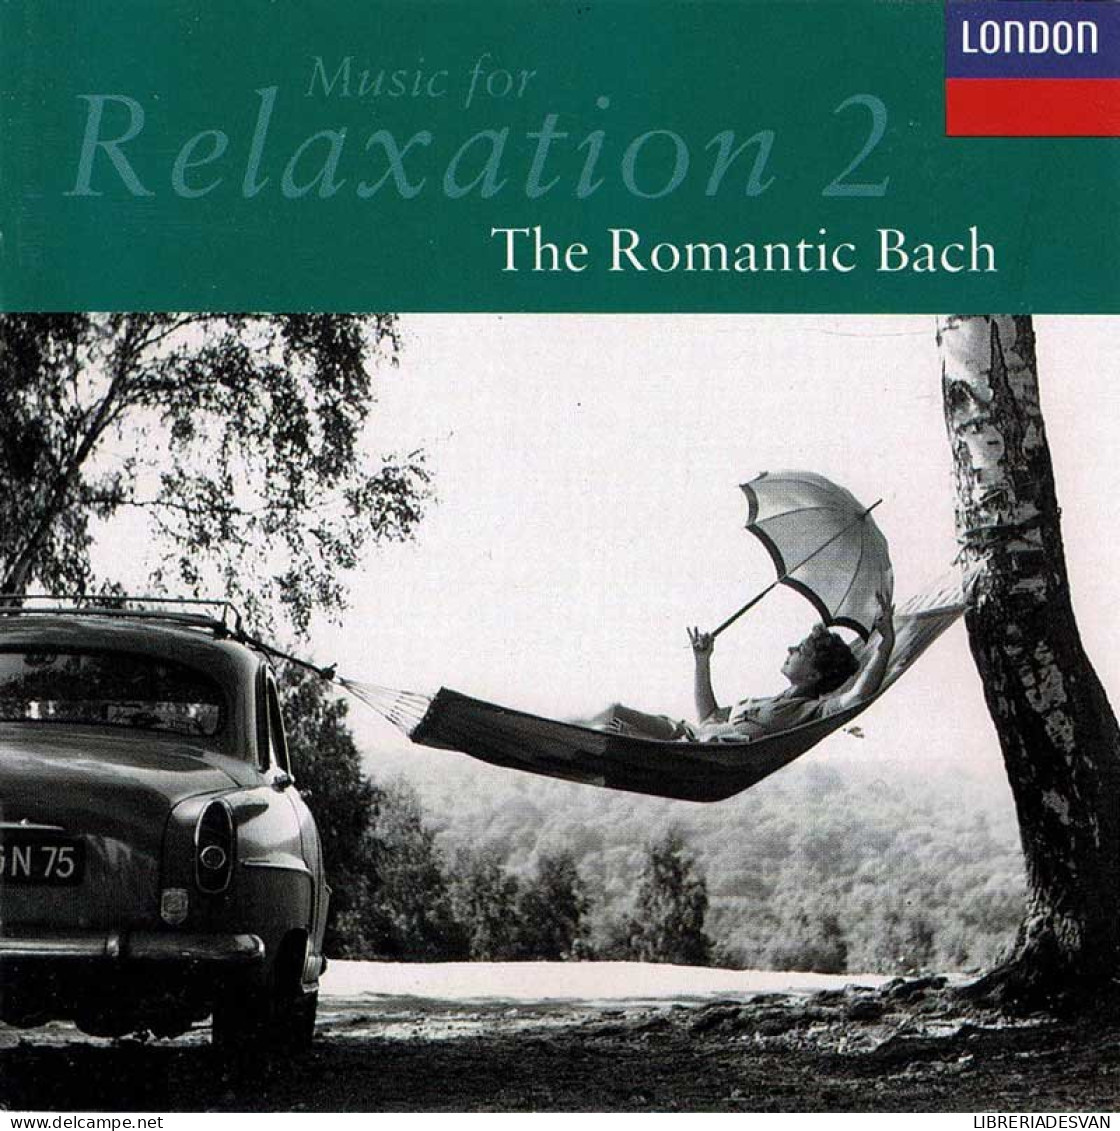 Music For Relaxation, Vol. 2: The Romantic Bach. CD - Classical